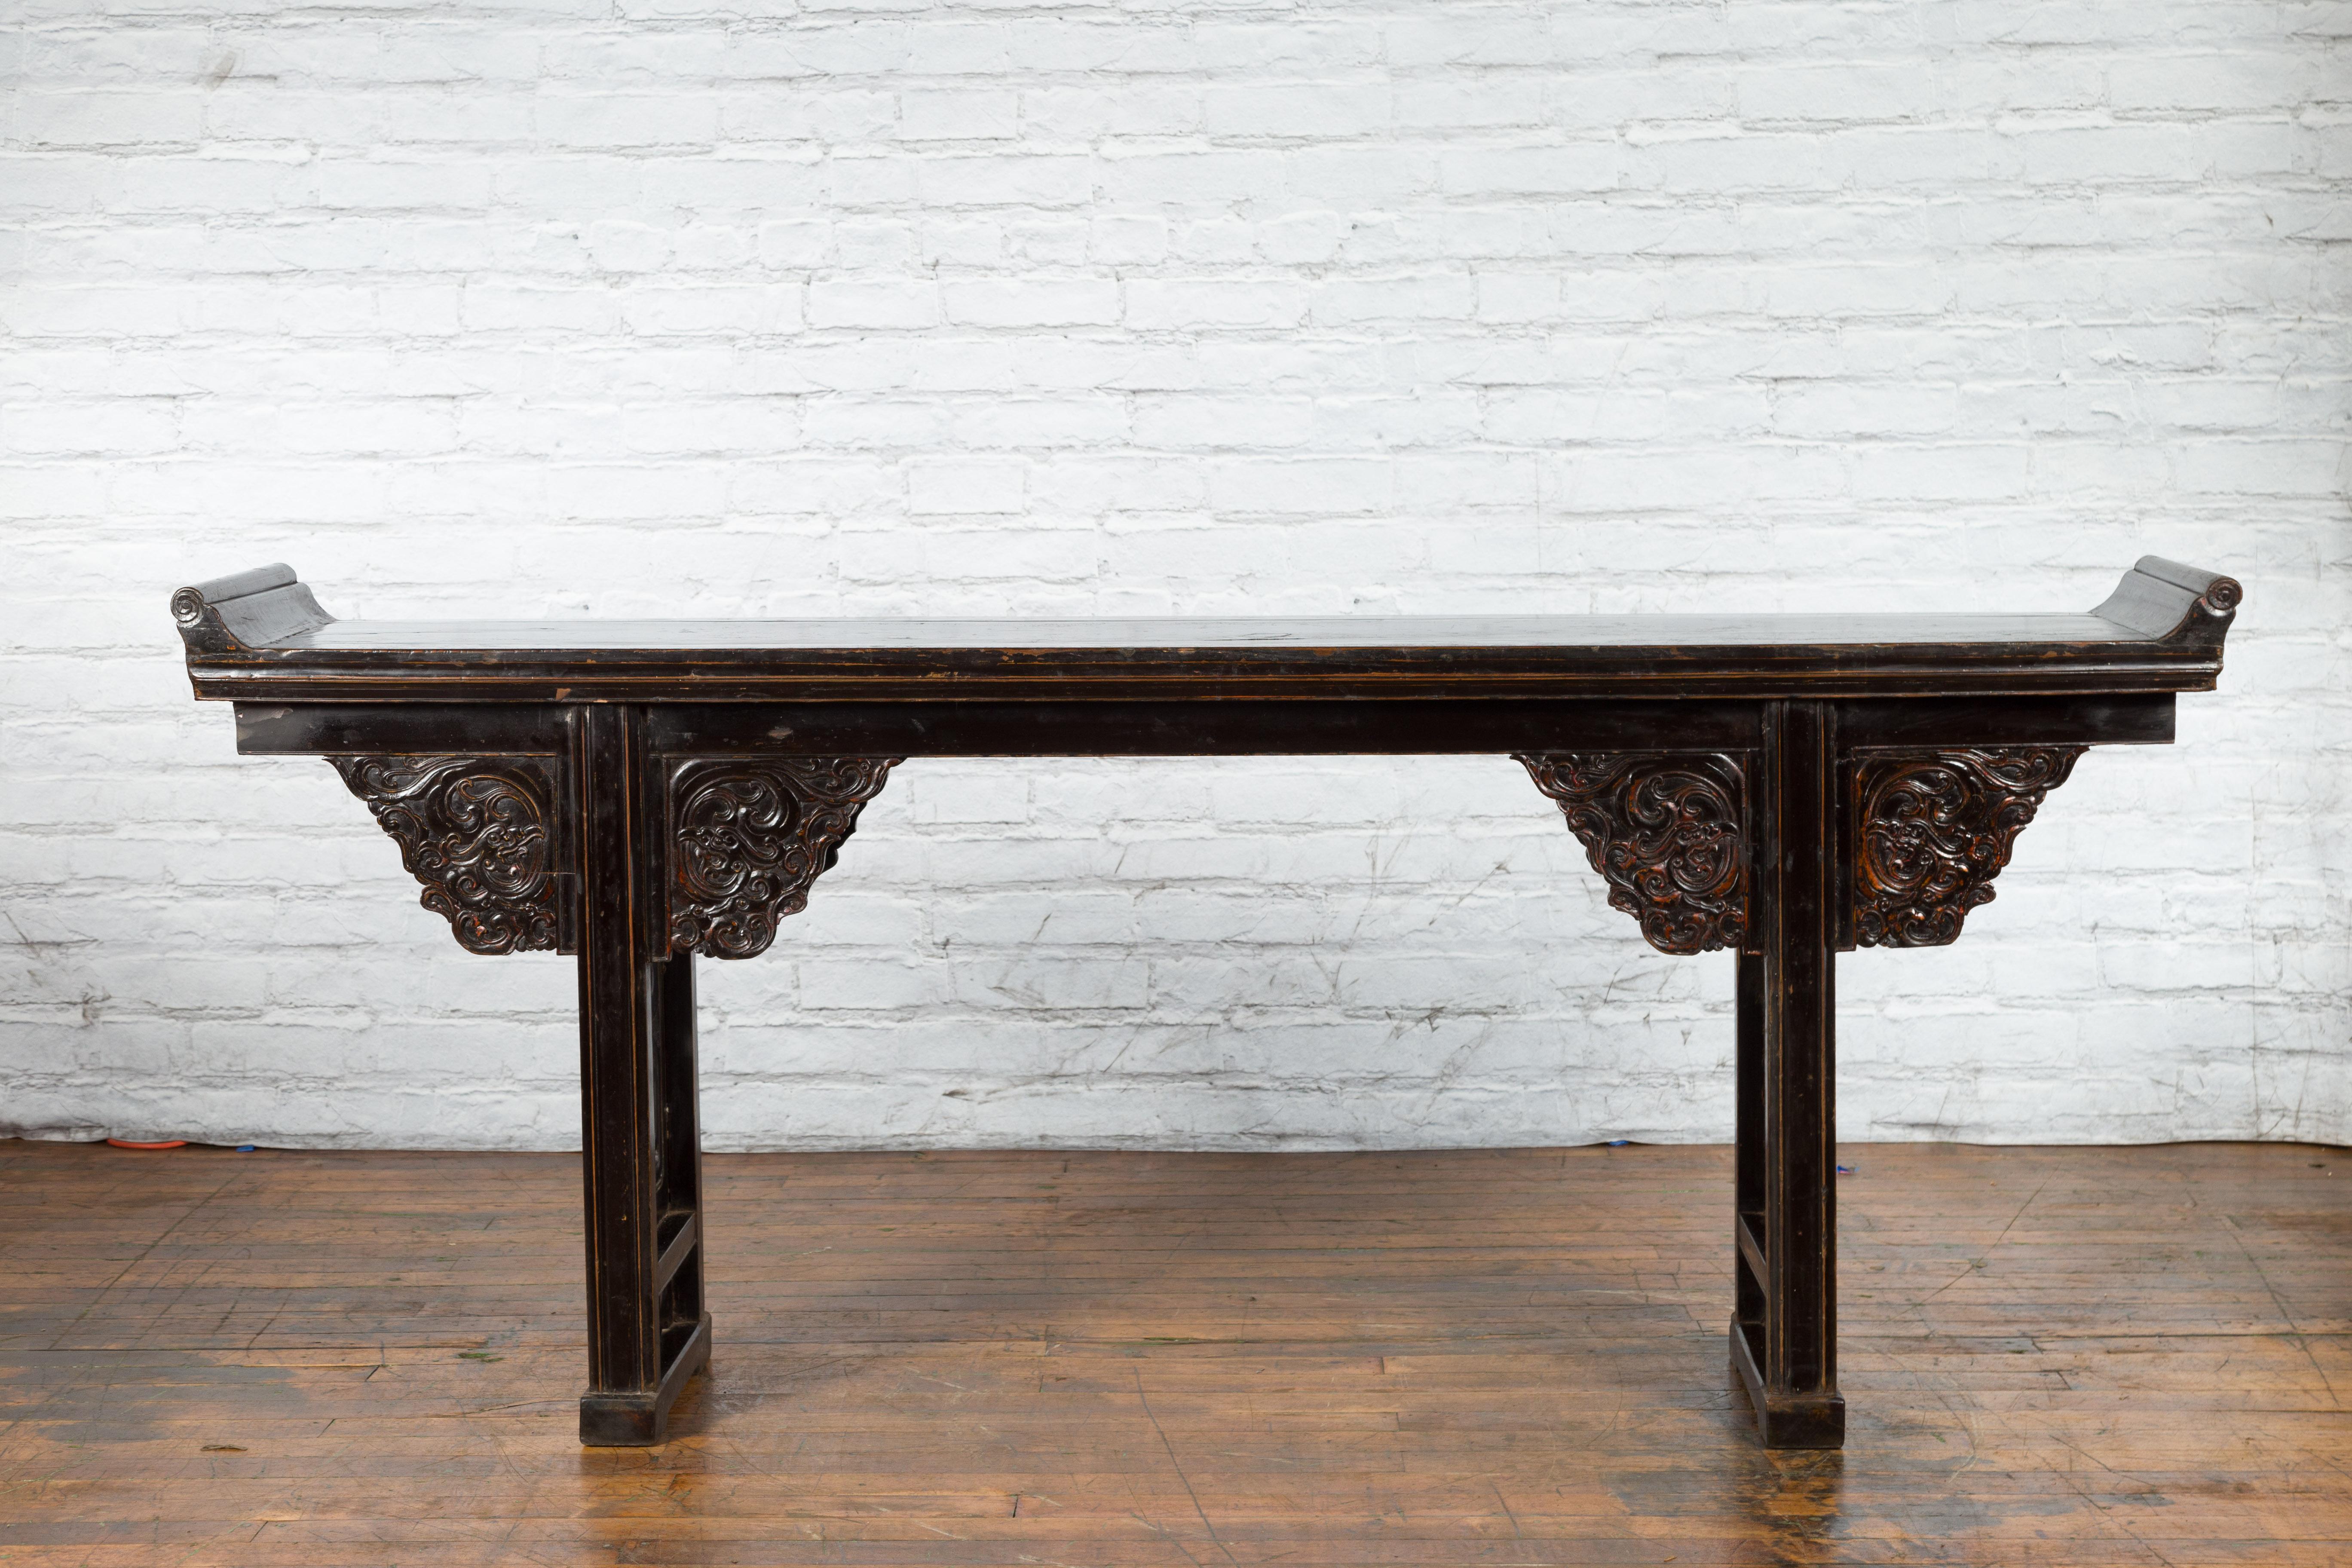 A Chinese Qing Dynasty period black lacquer altar console table from the early 19th century, with everted flanges, carved spandrels and openwork sides. Created in China during the Qing Dynasty in the early years of the 19th century, this console